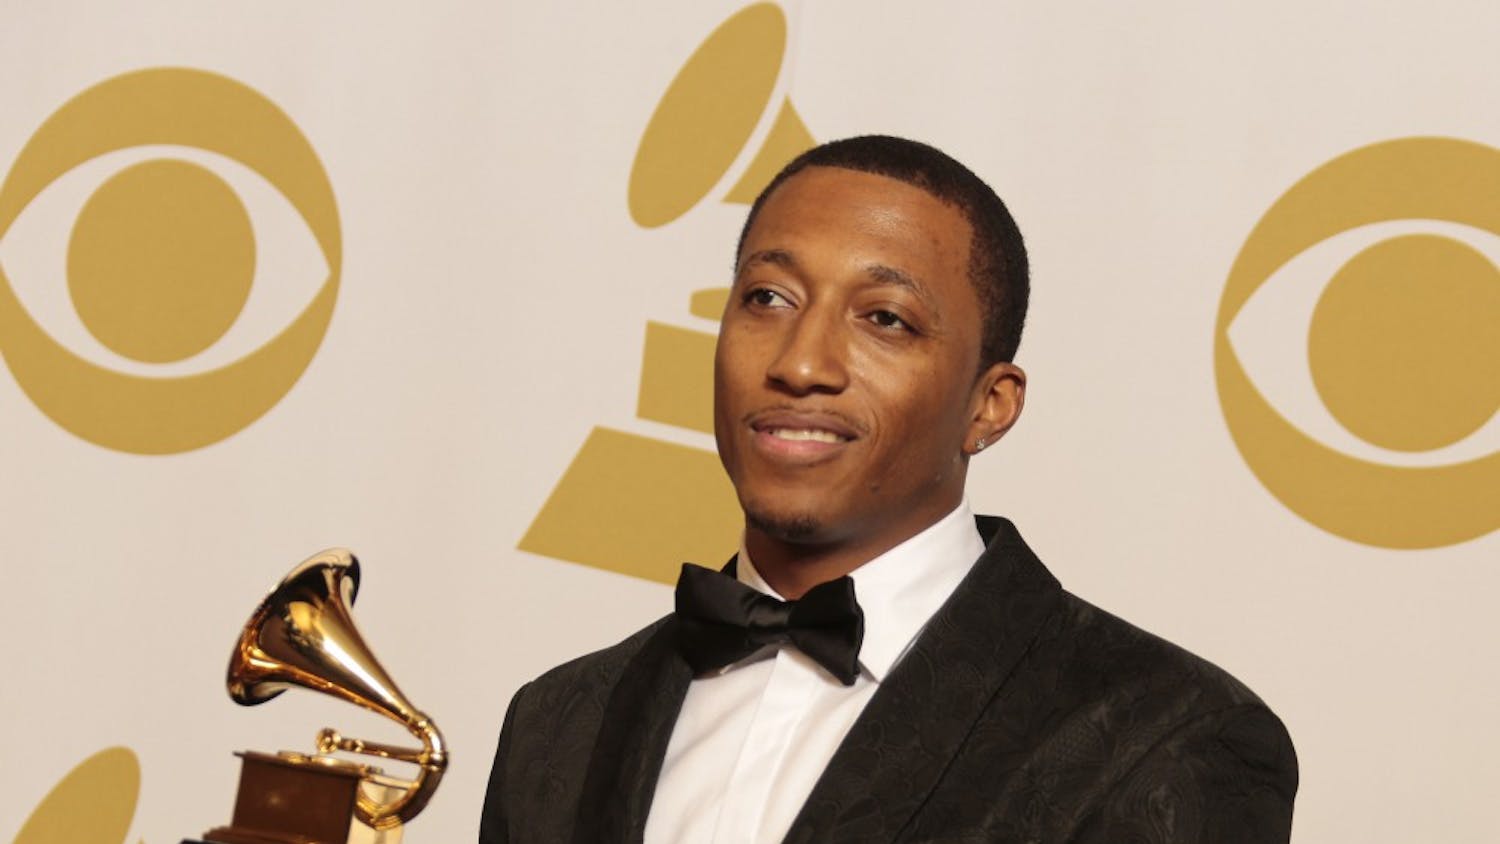 Lecrae backstage at the 57th Annual Grammy Awards at Staples Center in Los Angeles on Sunday, Feb. 8, 2015. (Lawrence K. Ho/Los Angeles Times/TNS)